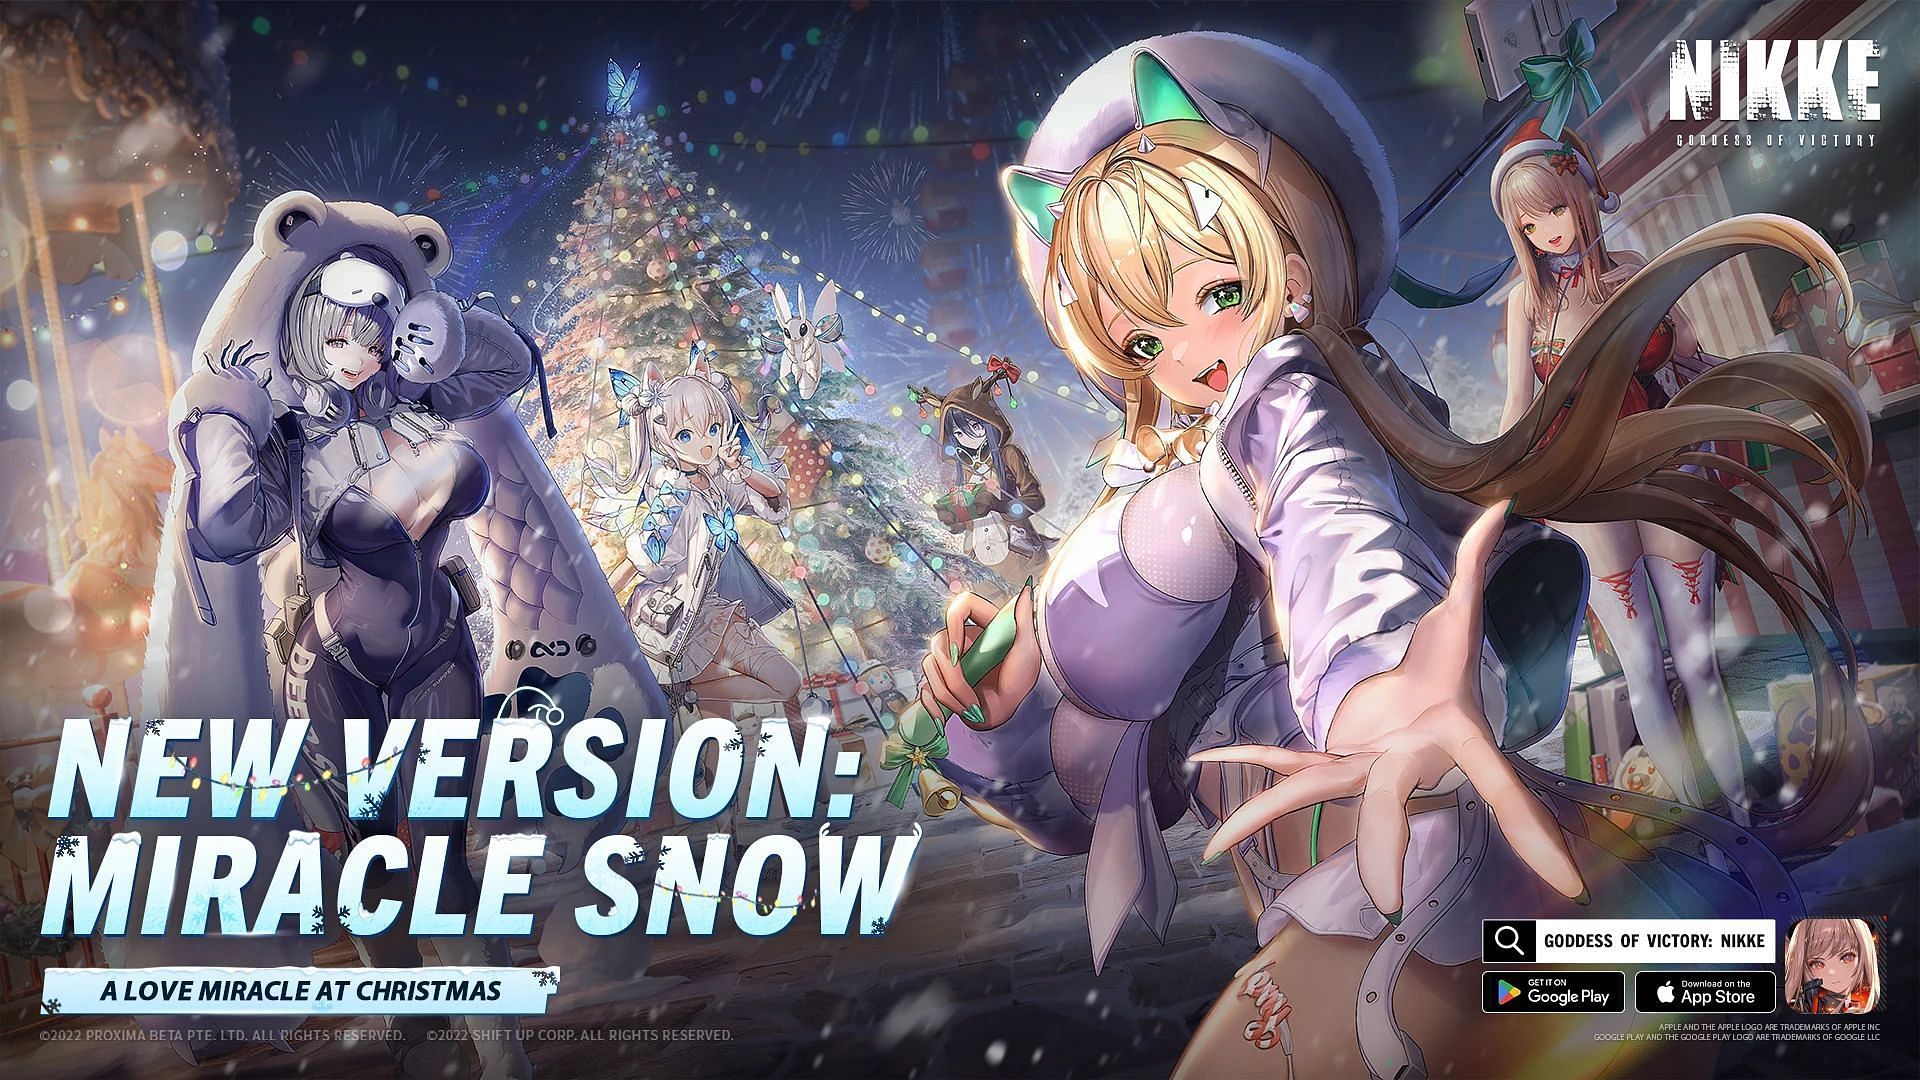 The Miracle Snow story event will be available in the Archives after the November 23 update. (Image via Shift Up)